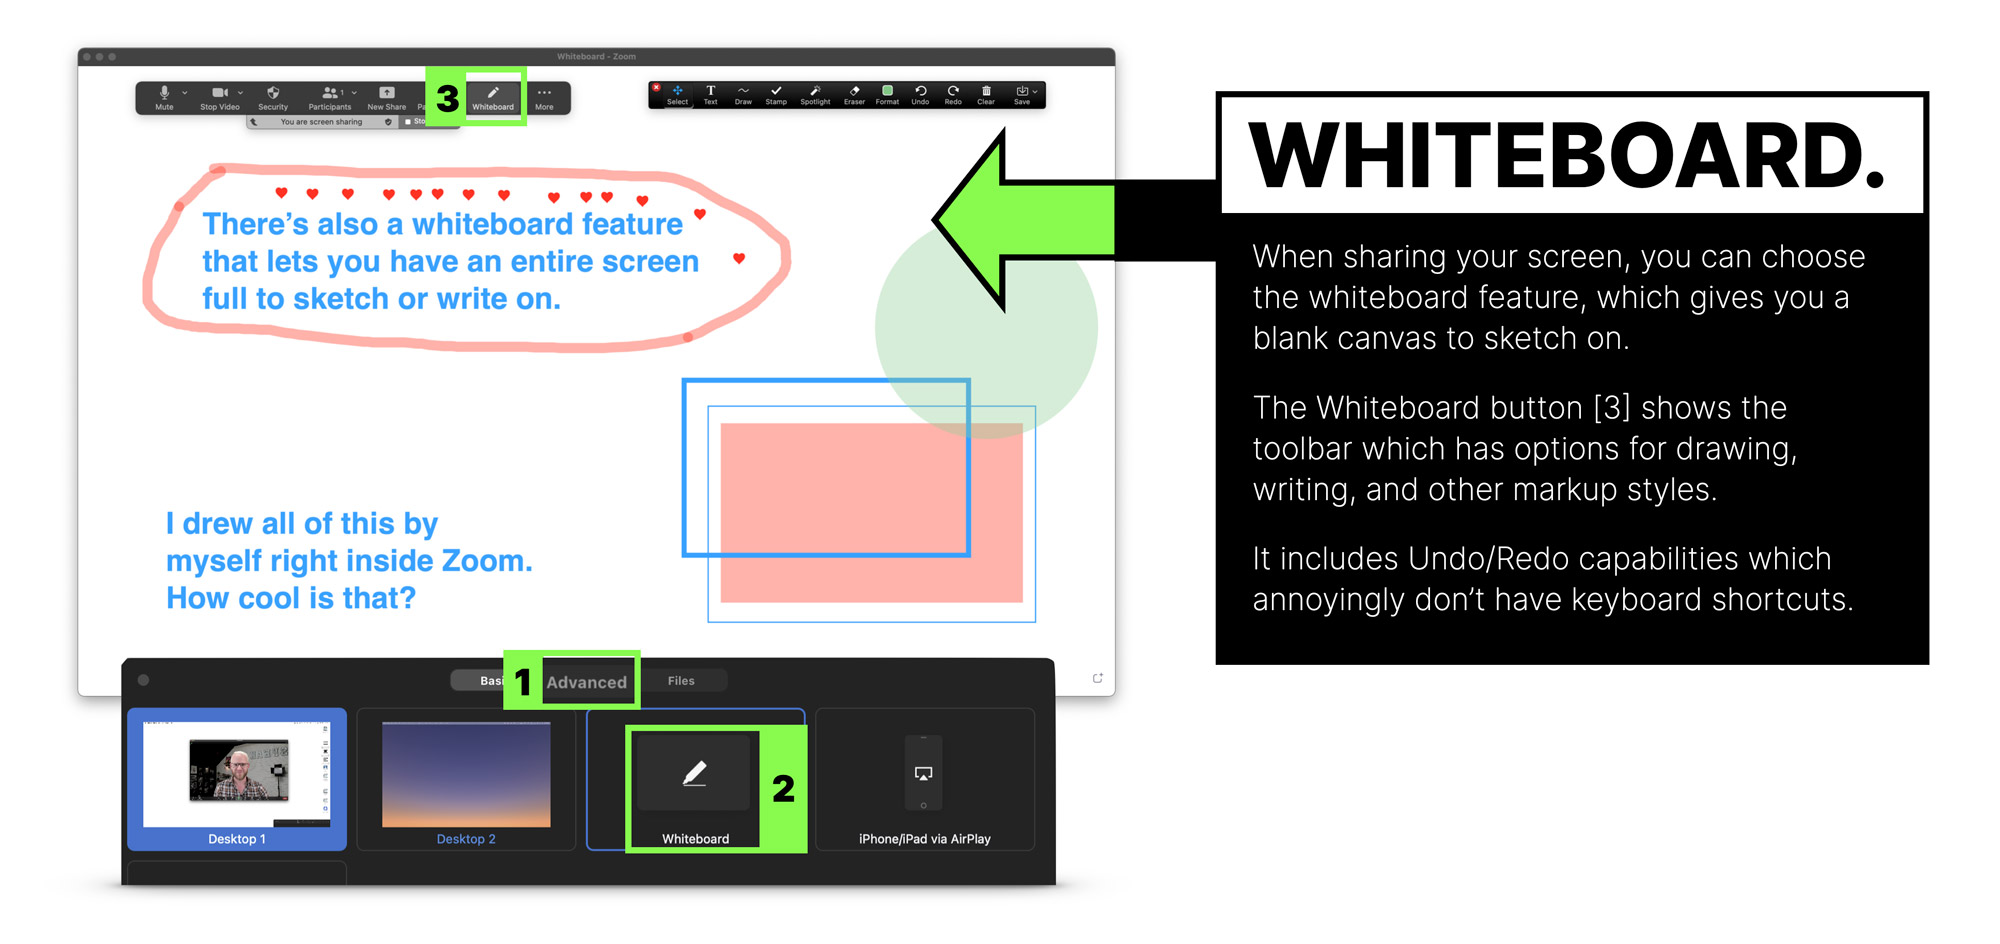 The Zoom whiteboard feature gives you a blank canvas whiteboard to sketch on for your audience.